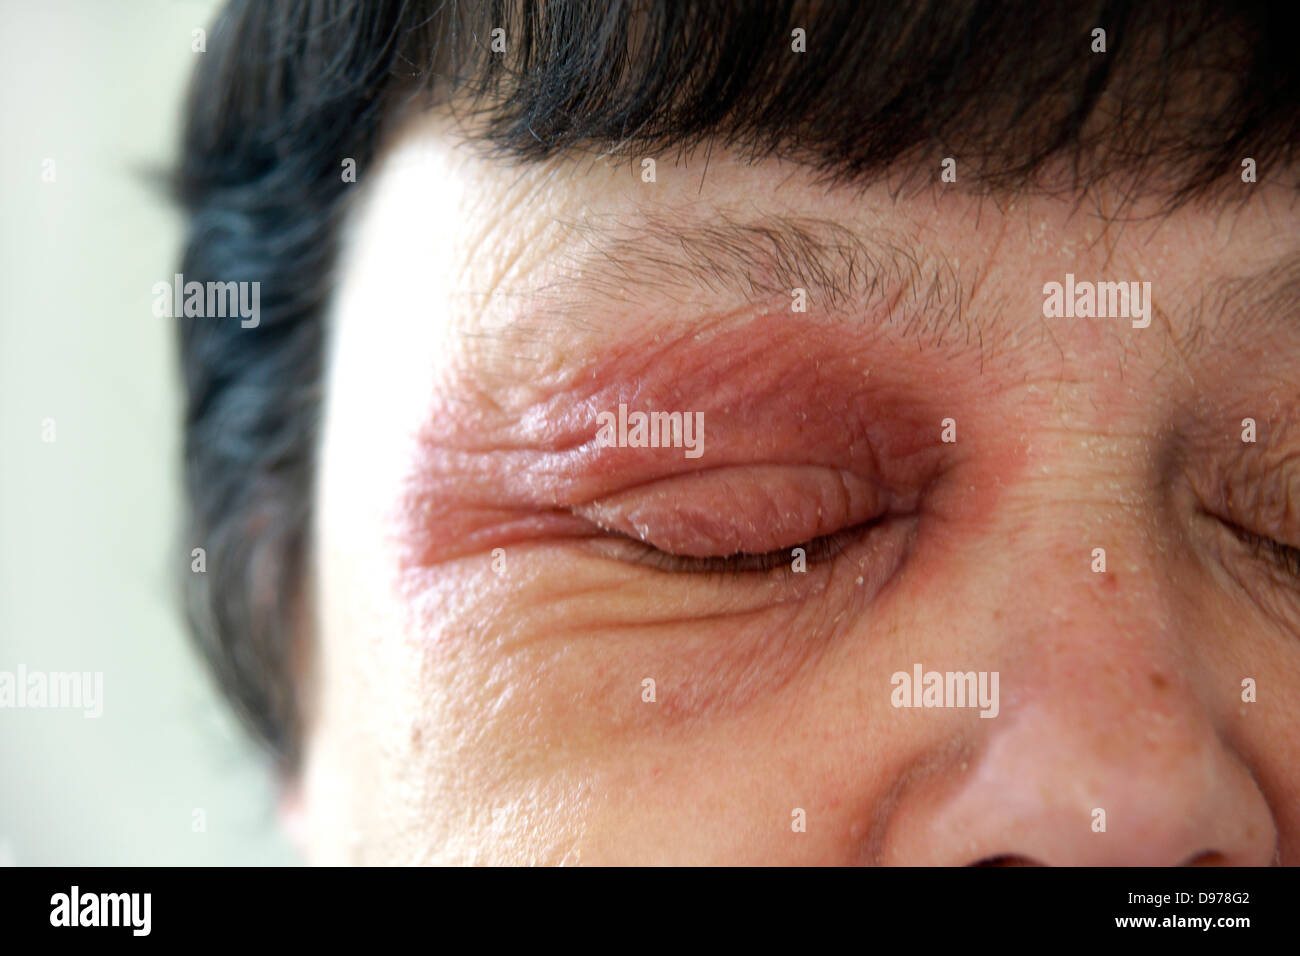 Woman suffering with eczema & a rash covering most of the face with the soreness surrounding & affecting the eyes Stock Photo